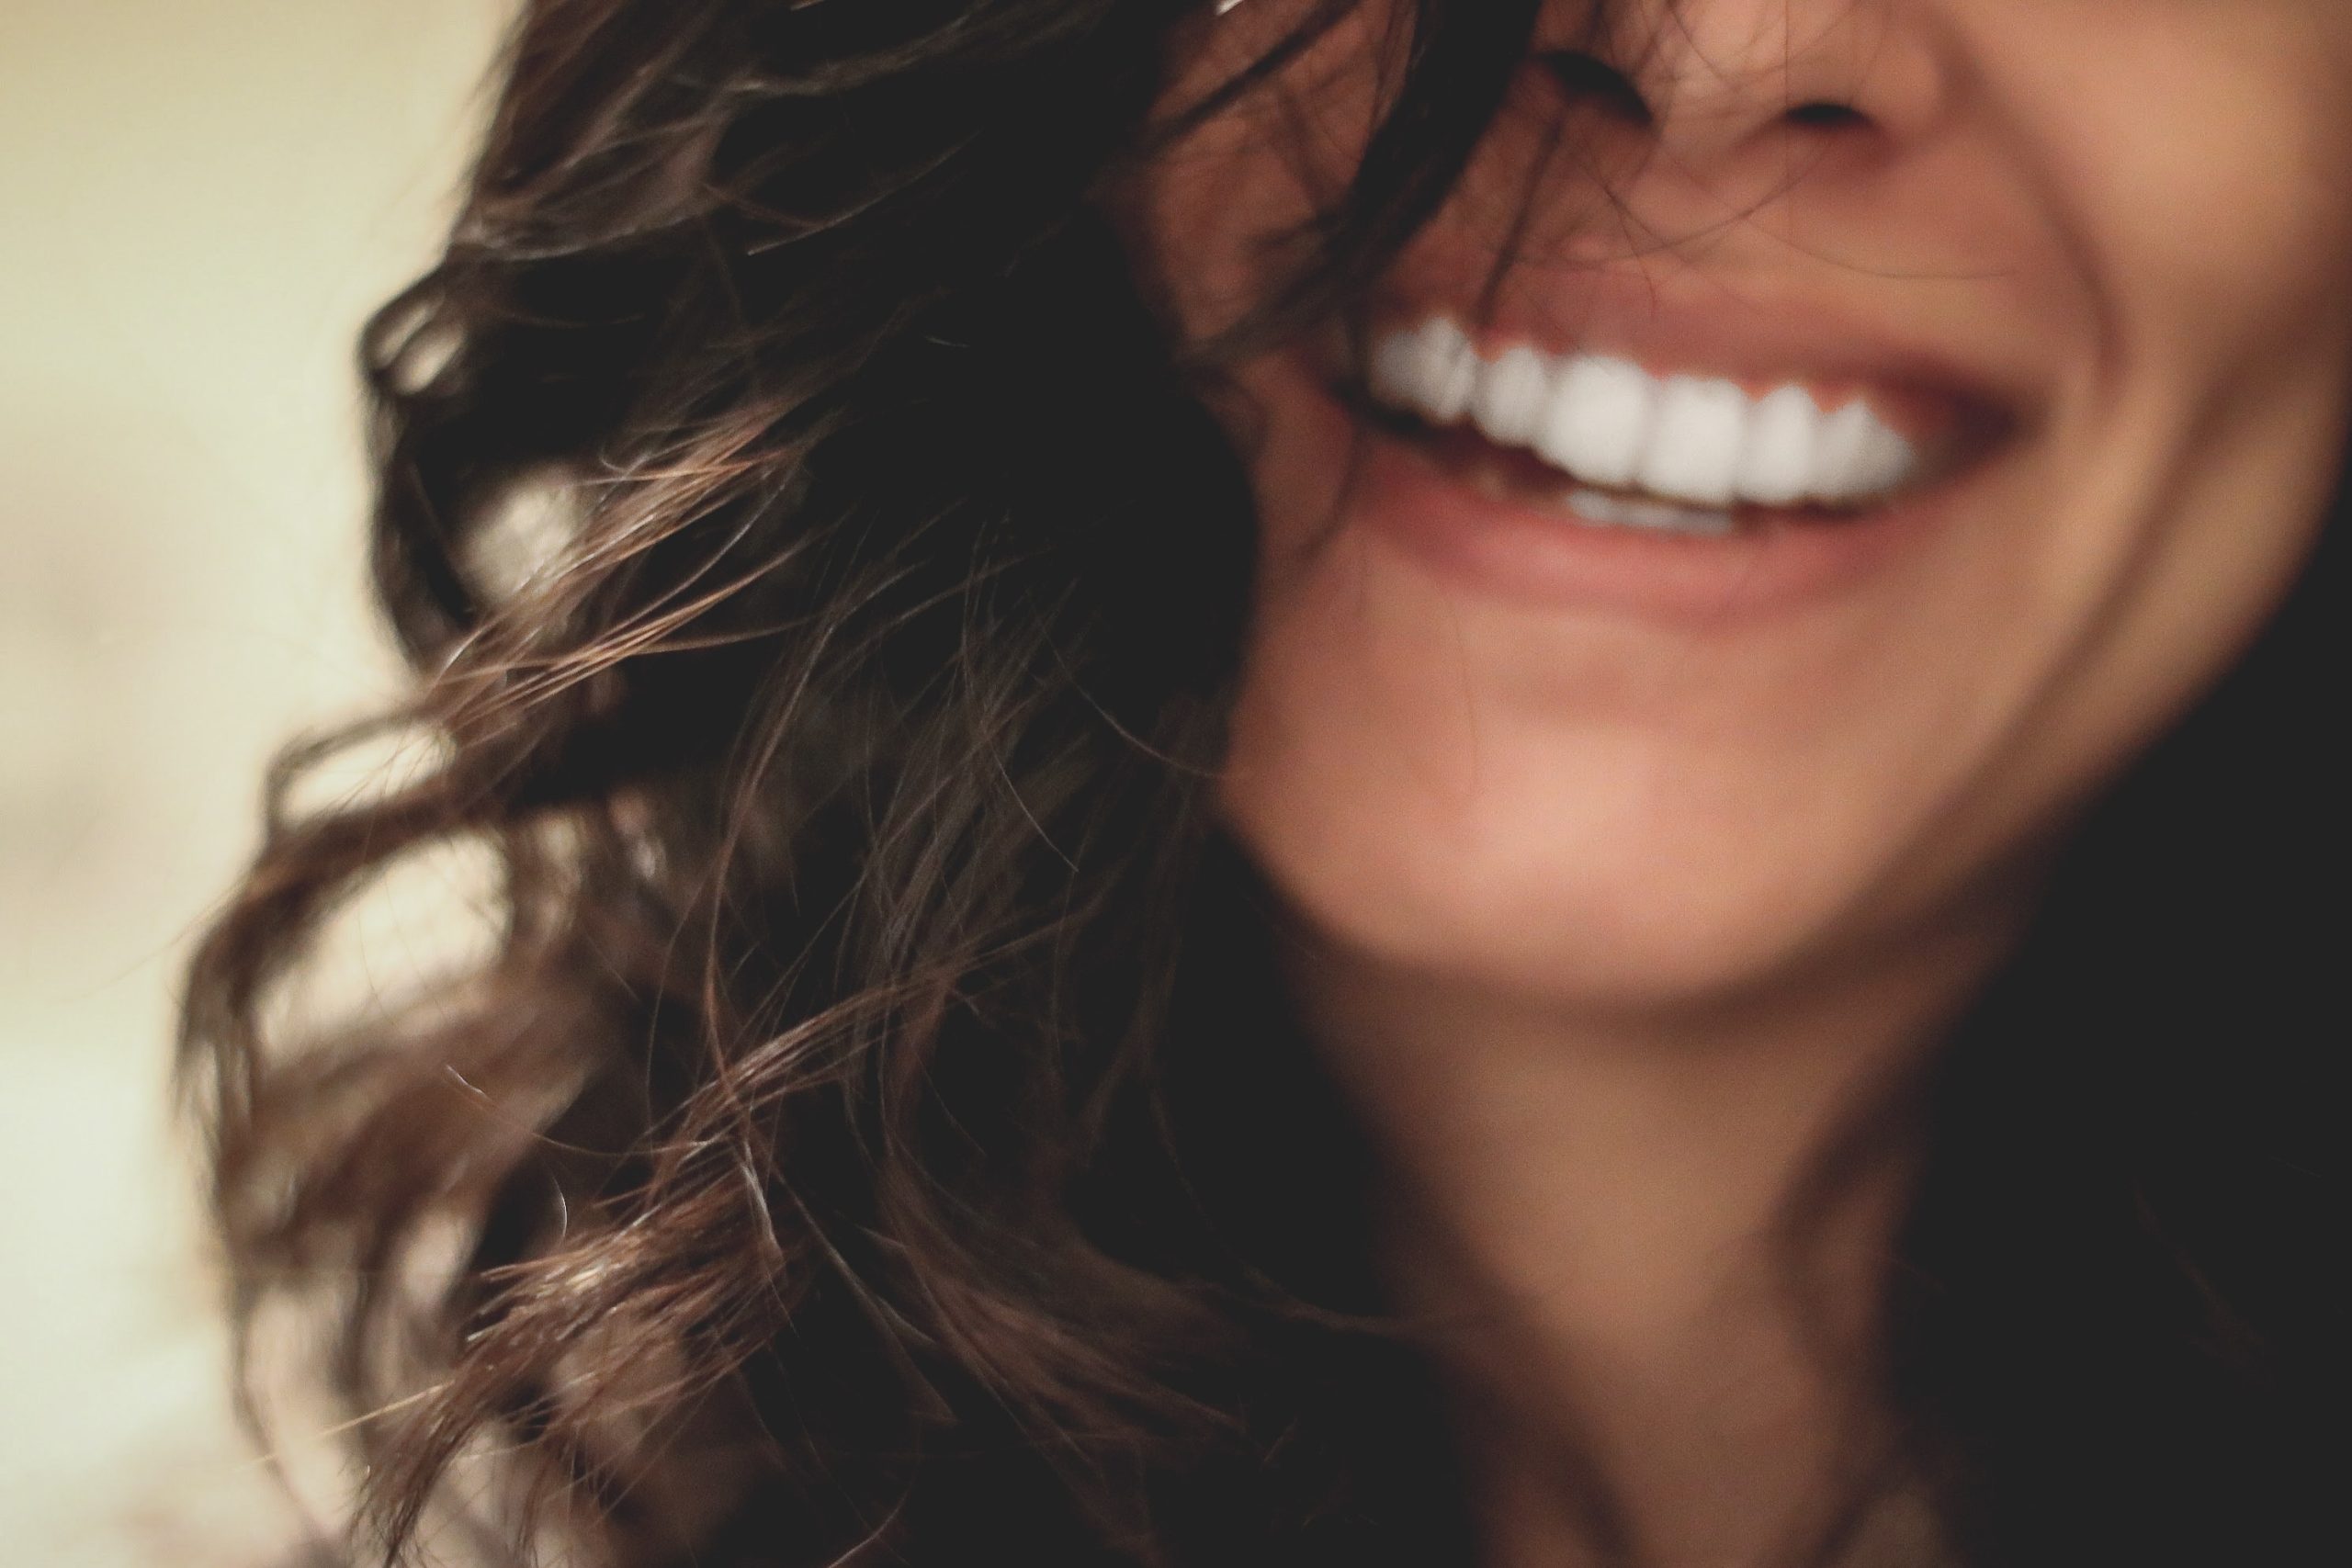 Does Your Hair Affect Your Happiness?   